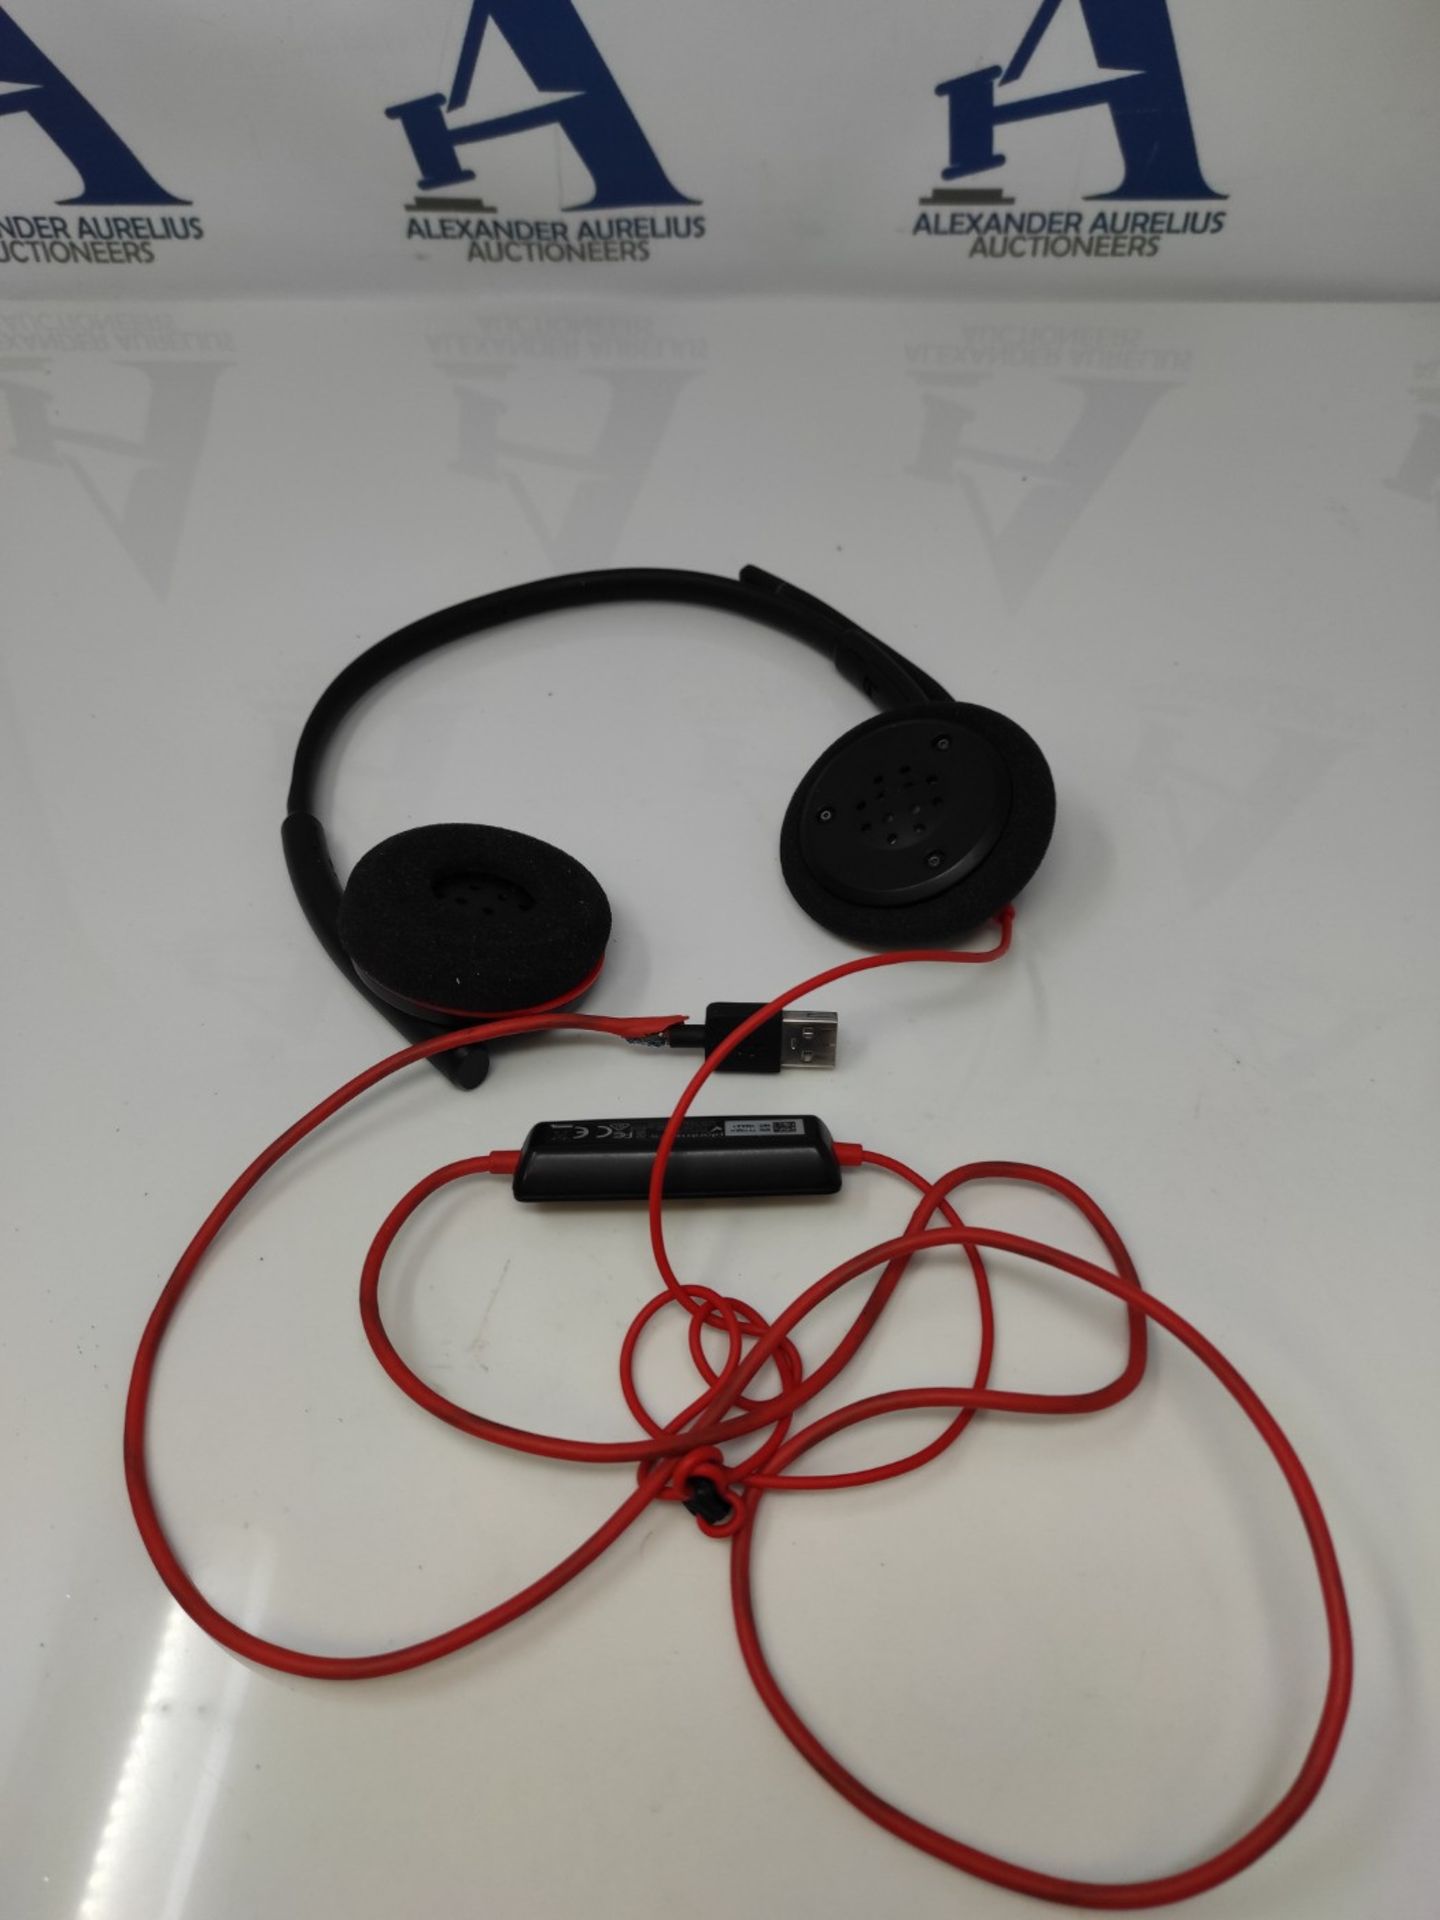 [CRACKED] Plantronics - Blackwire 3220 USB-A Wired Headset - Dual Ear (Stereo) with Bo - Image 3 of 3